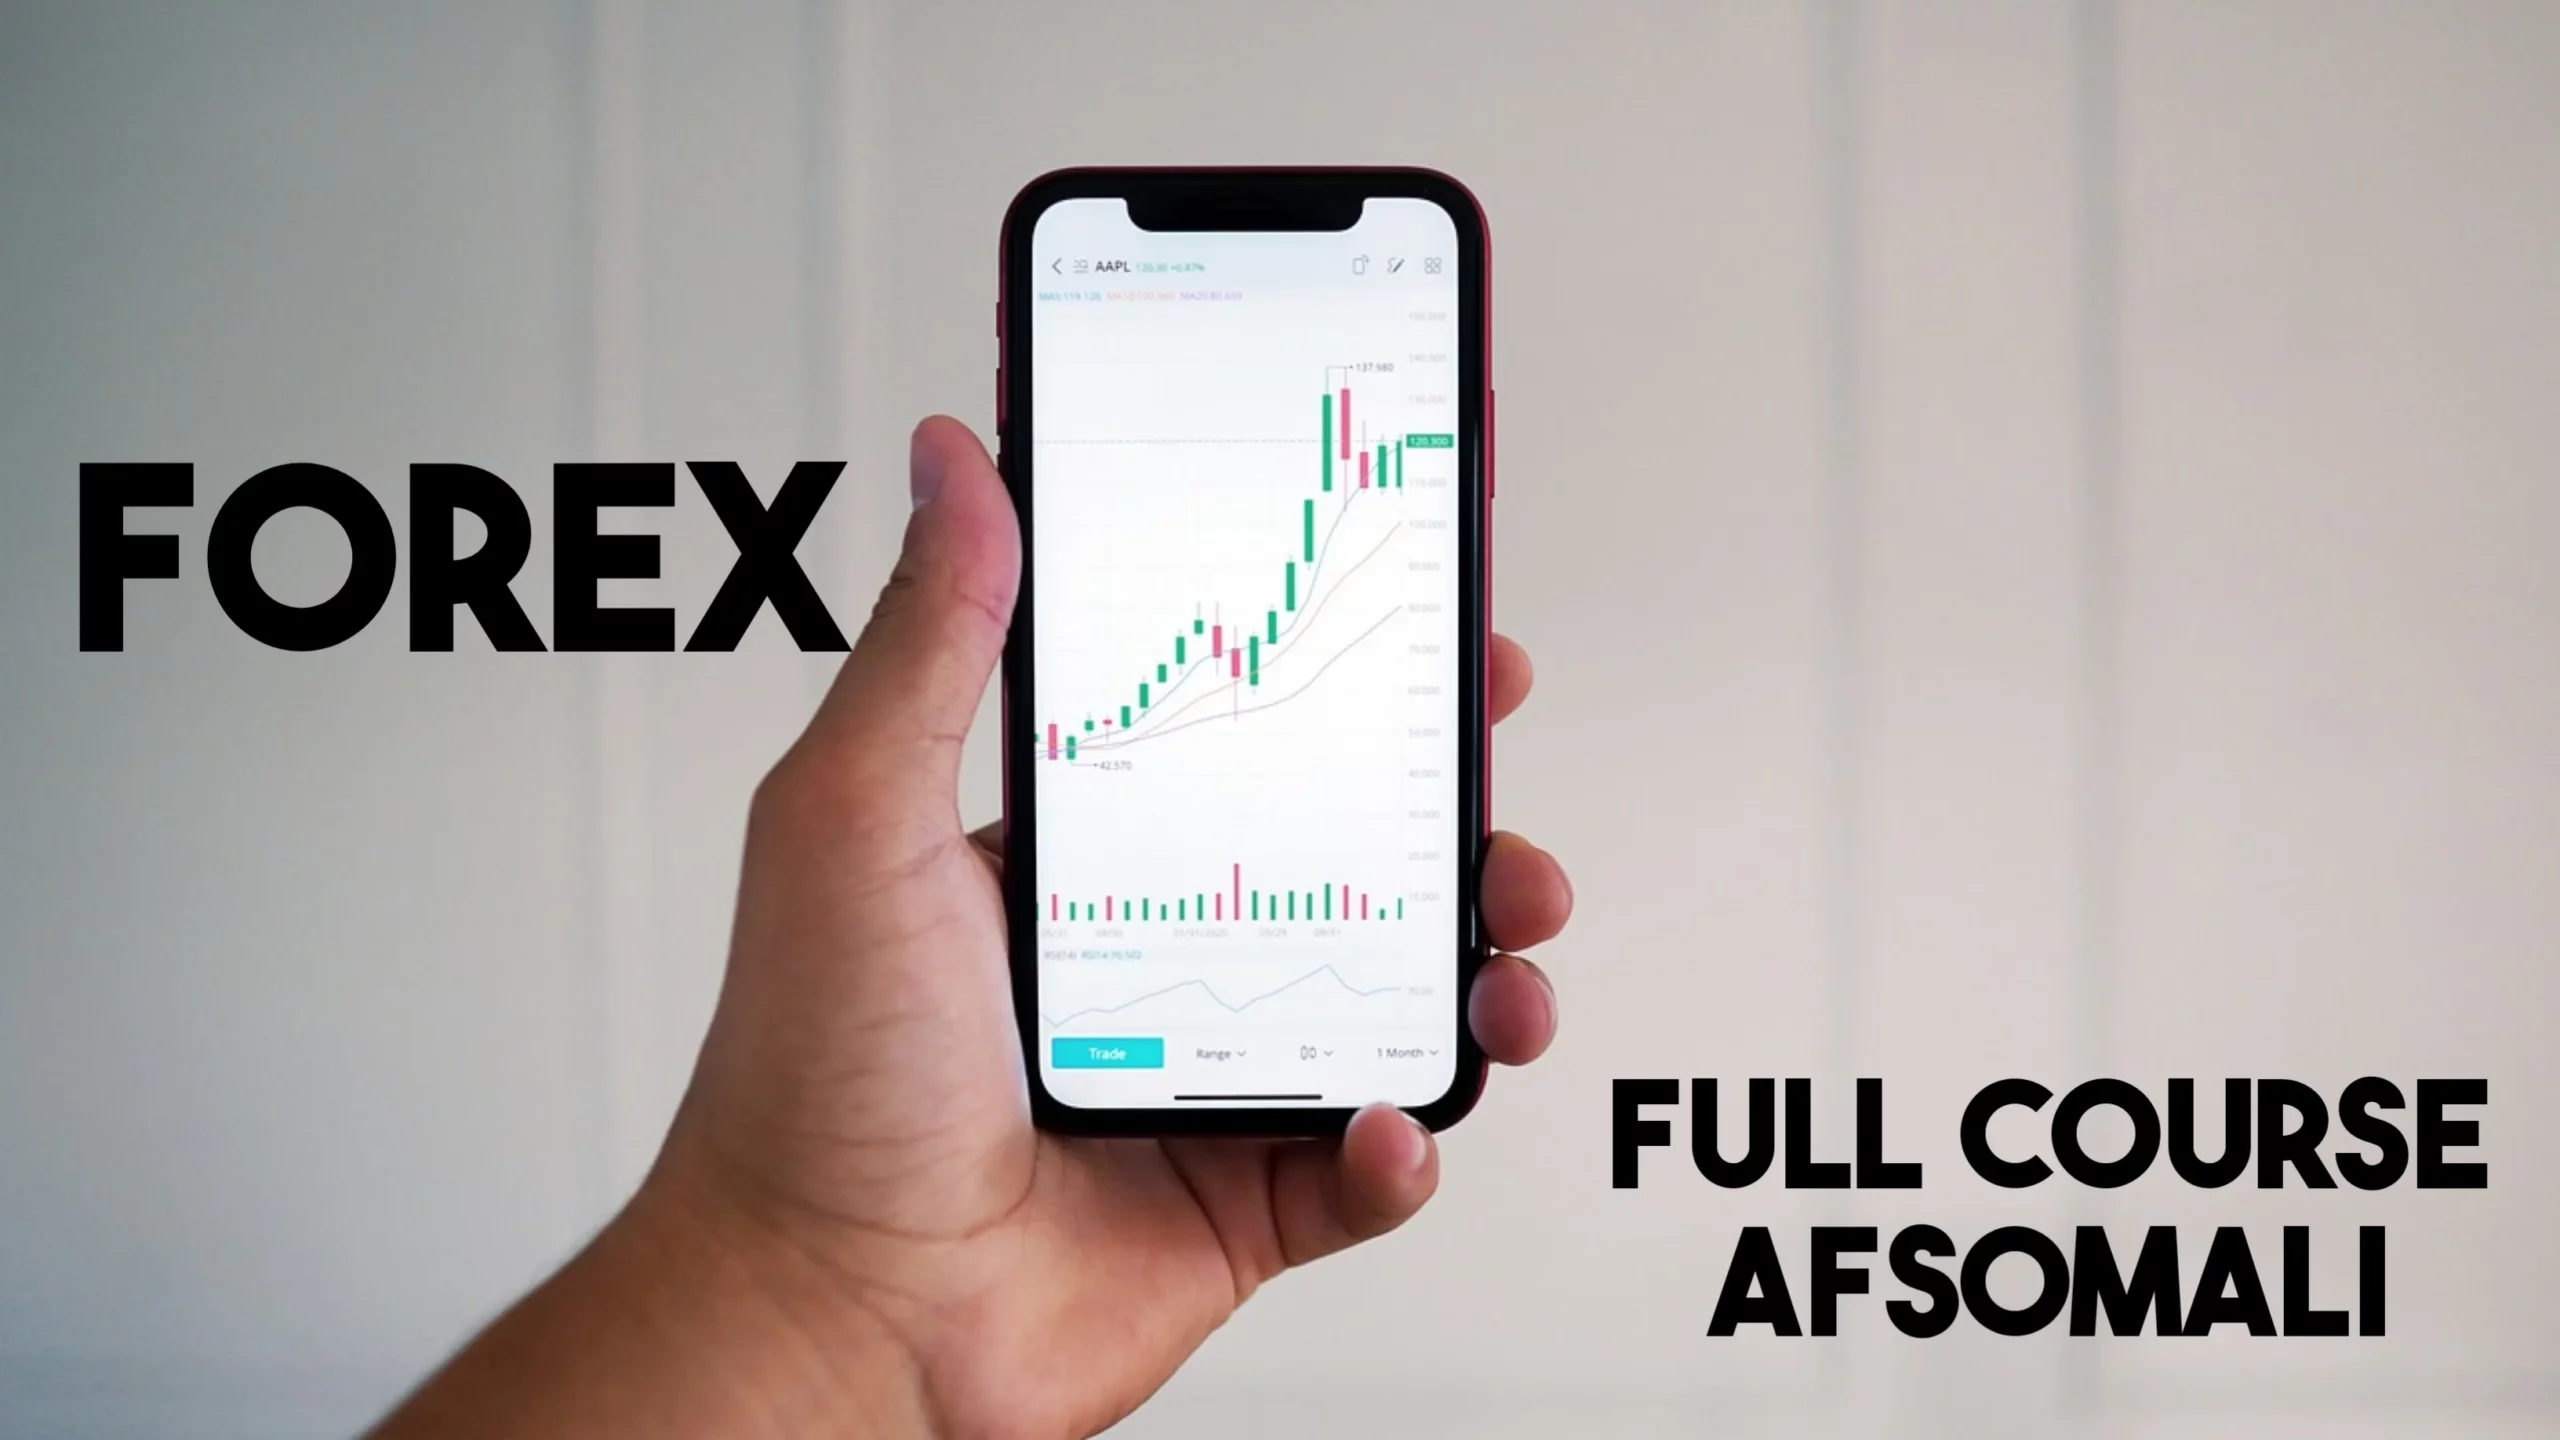 Forex Full Course Afsomali